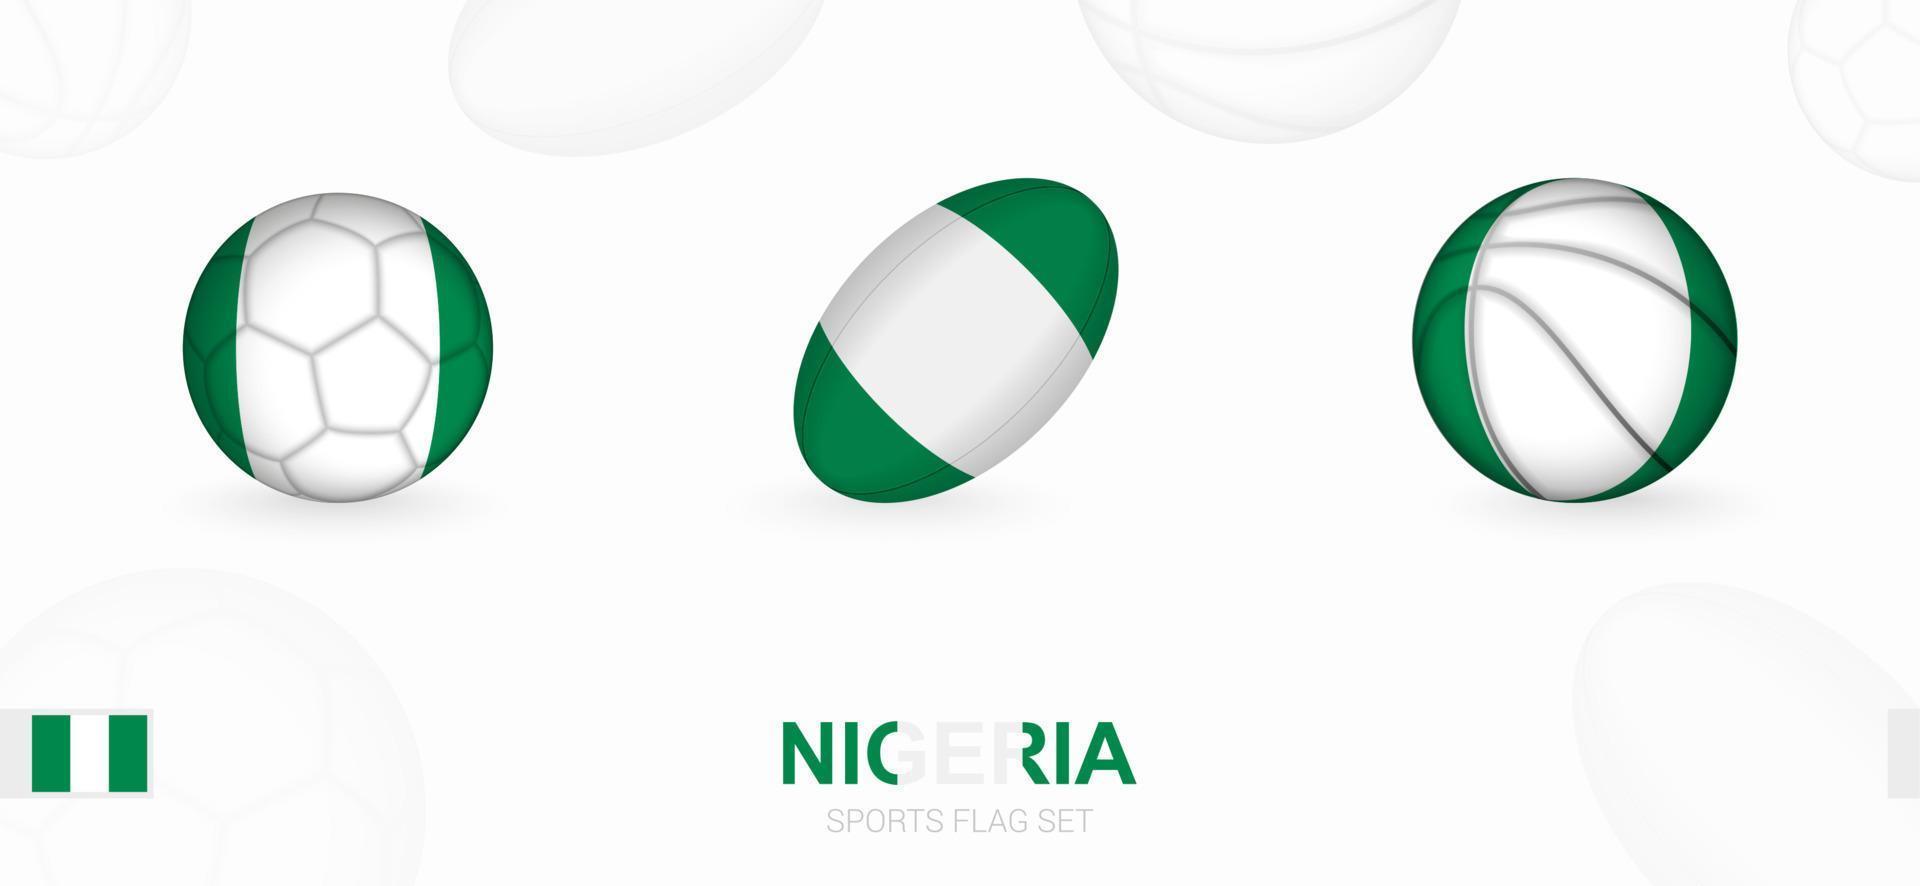 Sports icons for football, rugby and basketball with the flag of Nigeria. vector